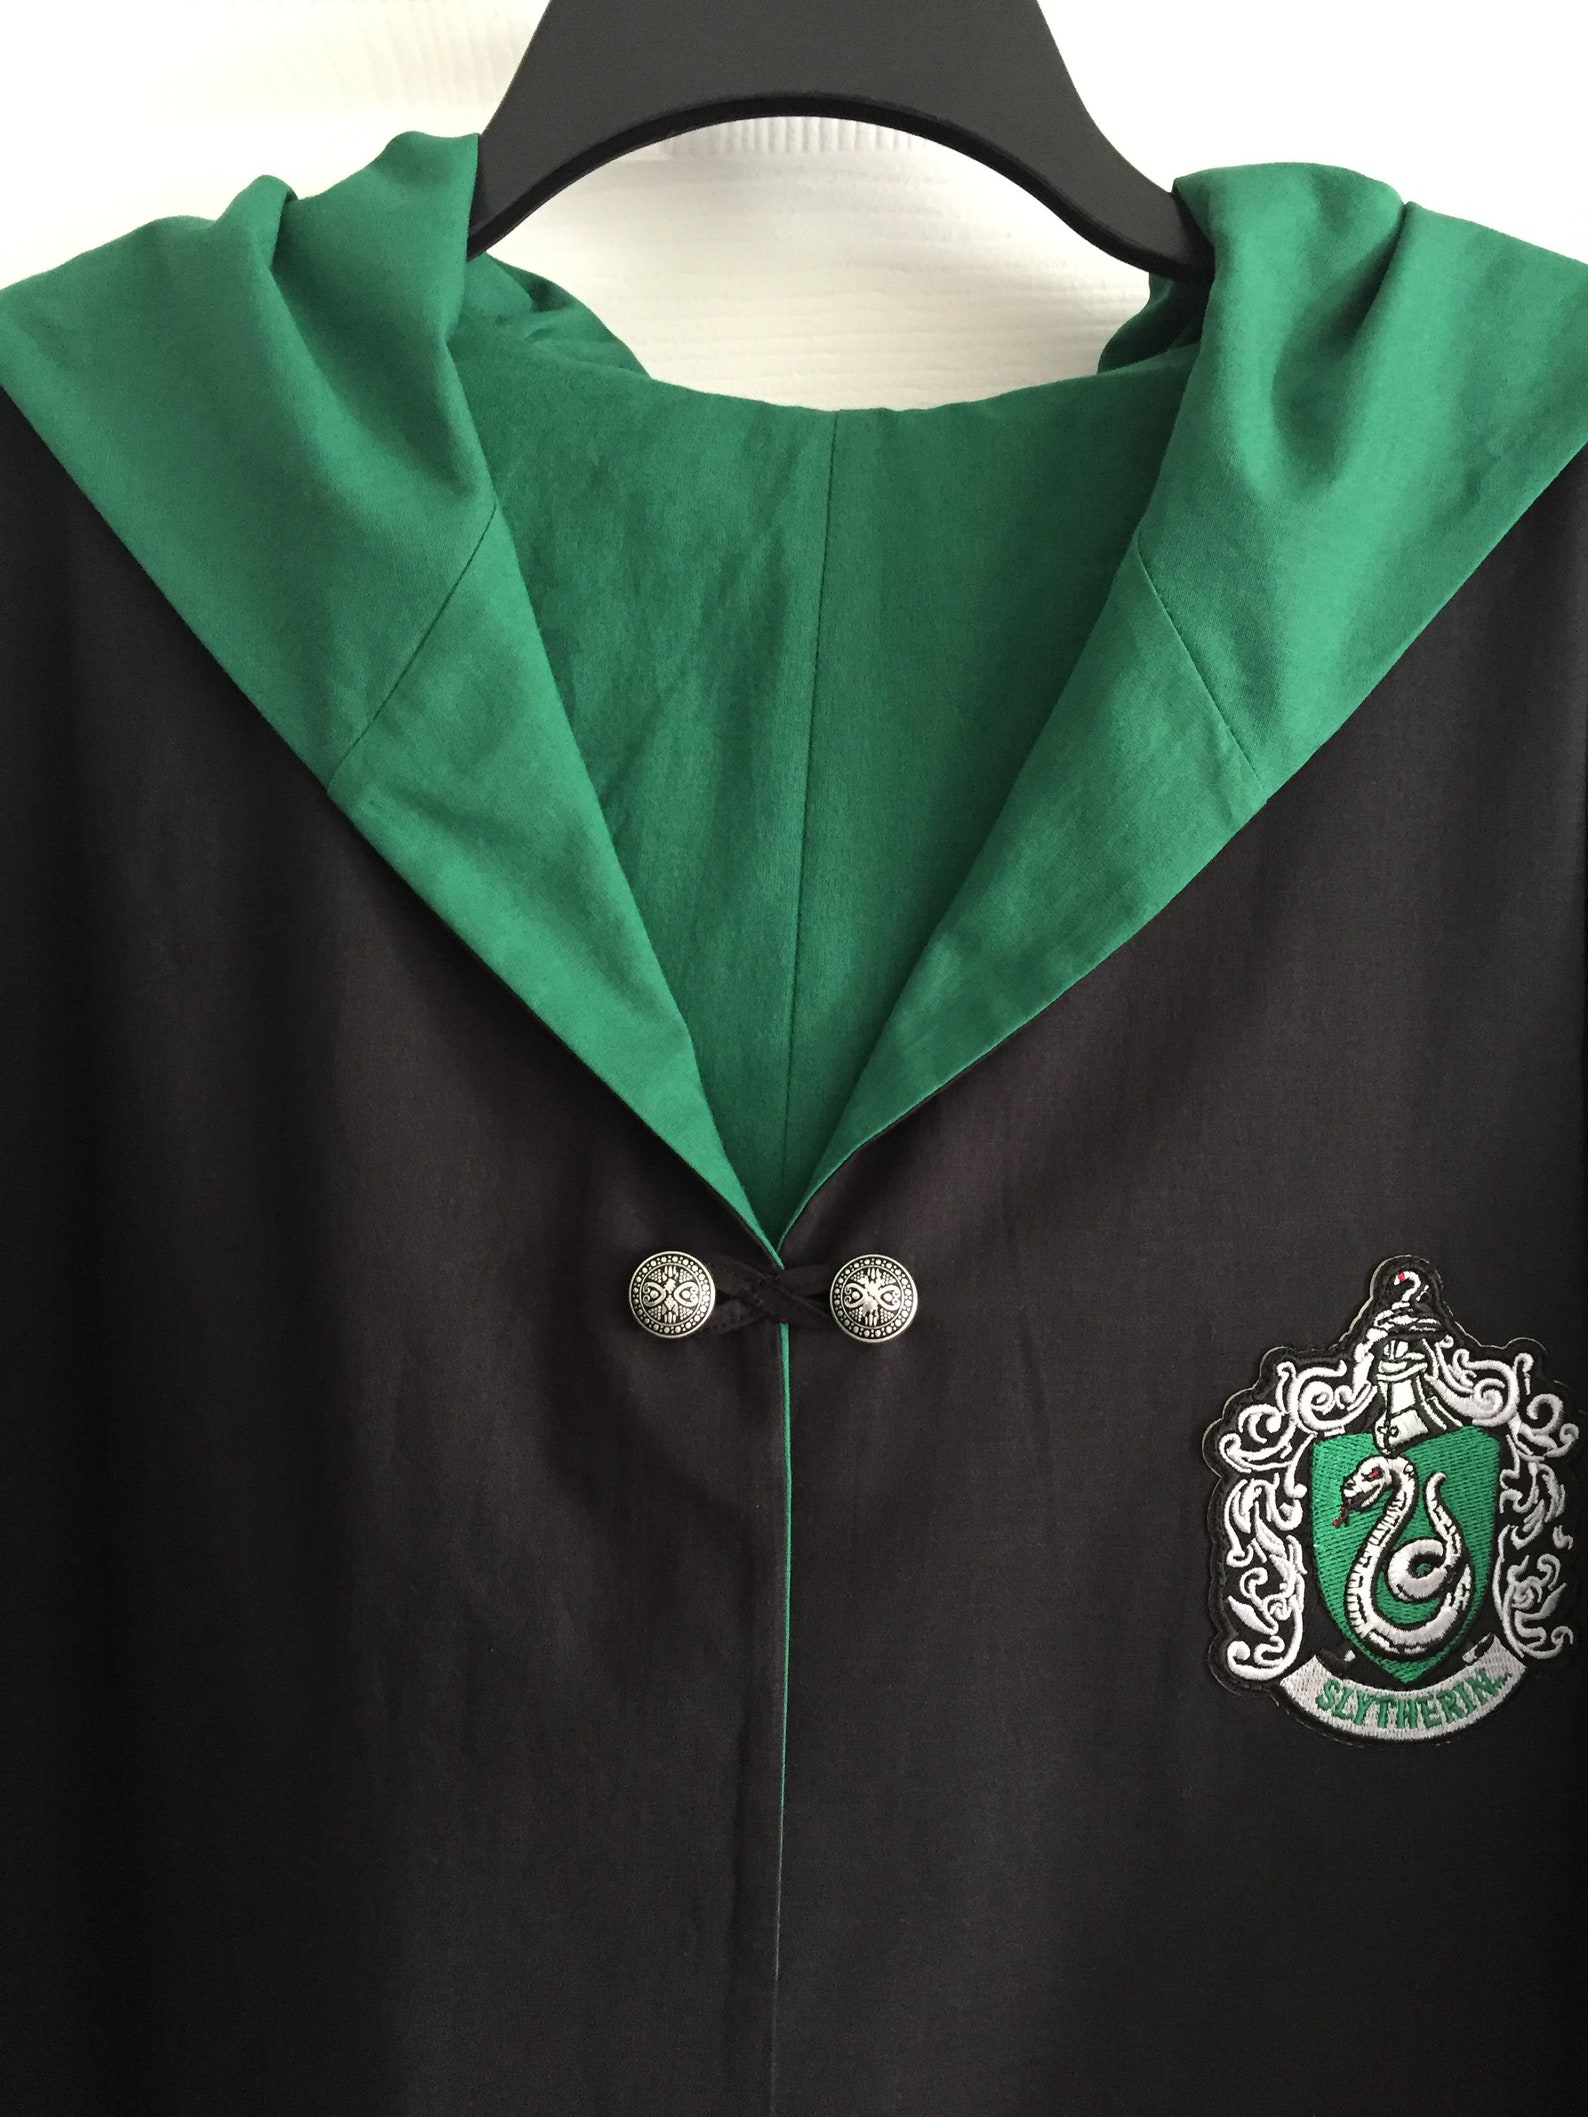 Wizarding Lined Robe Black and Dark Green Costume Adult M | Etsy